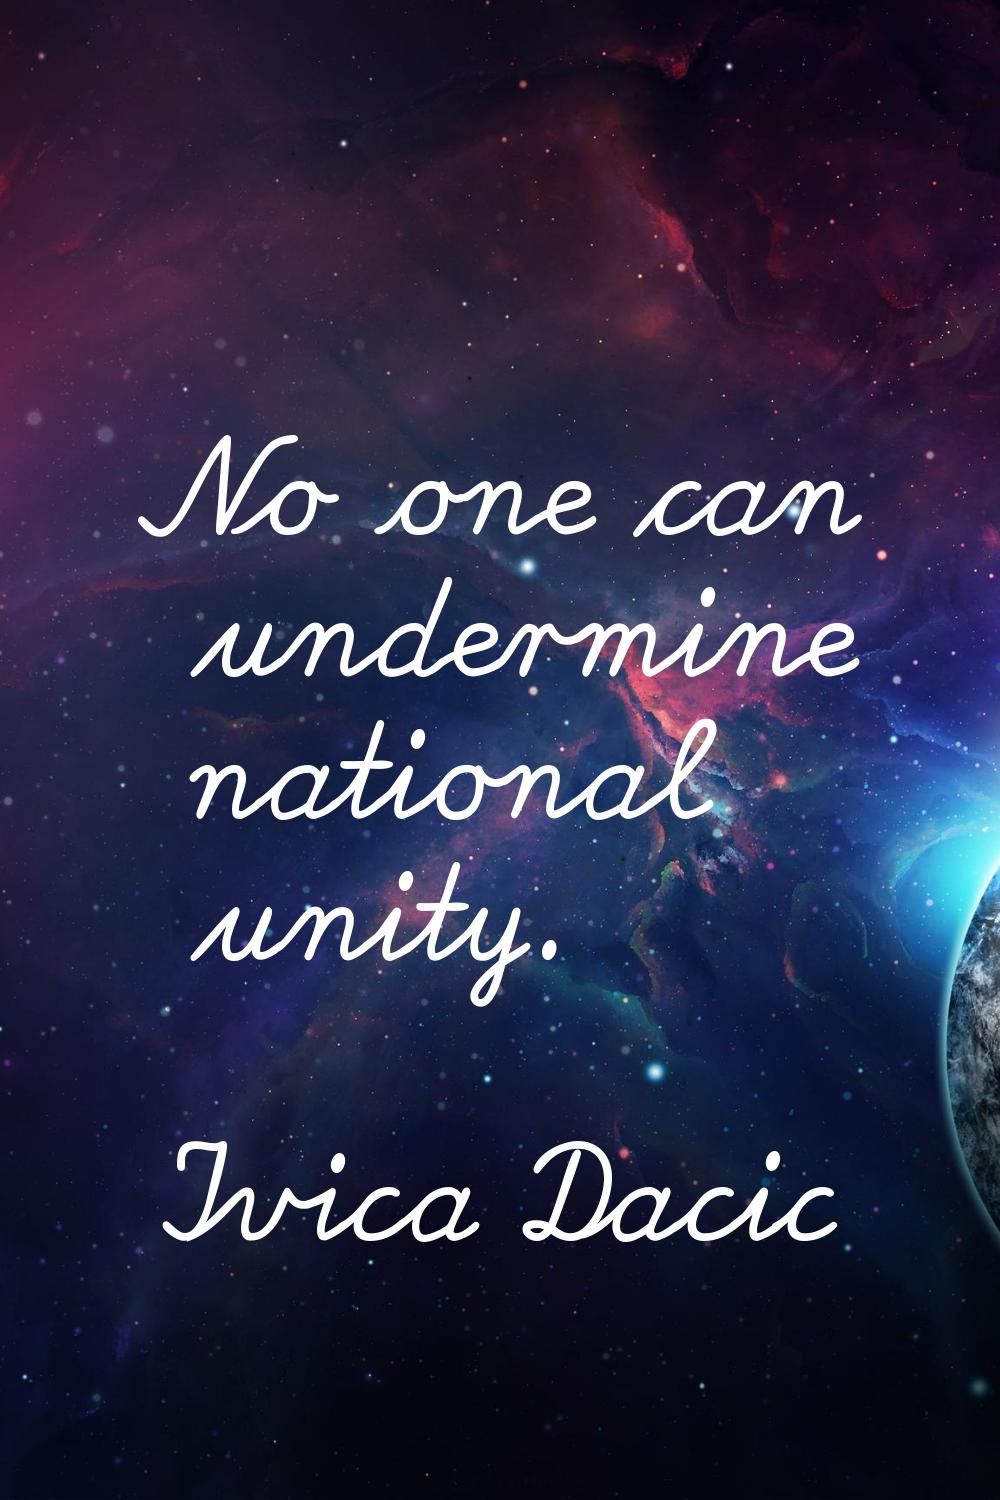 No one can undermine national unity.